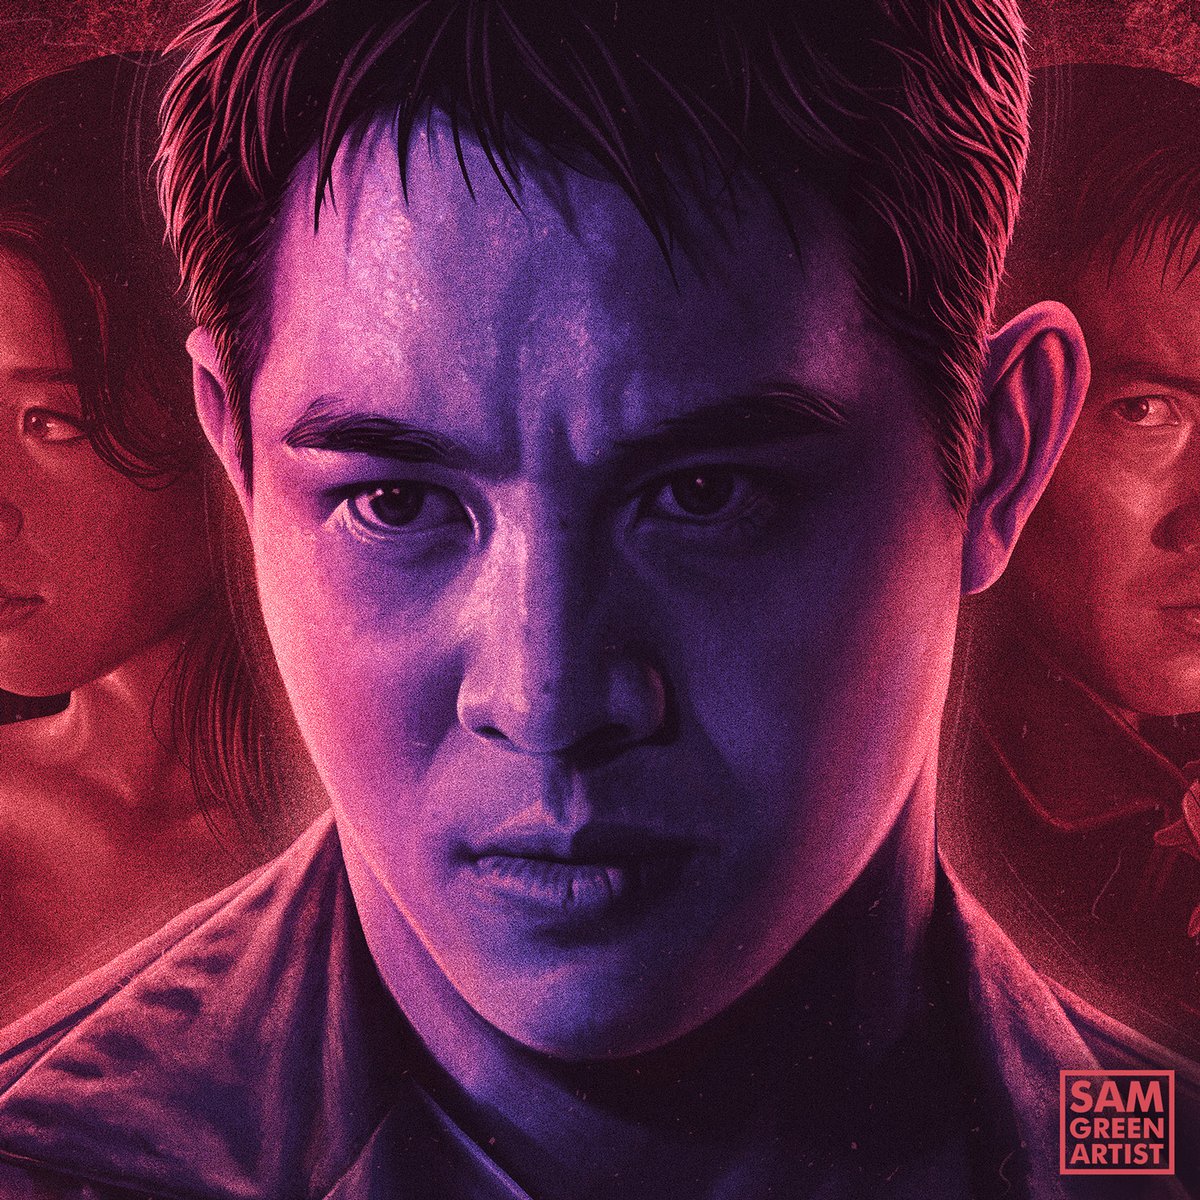 Jet Li, close-up detail.

Painted in @Procreate

The Bodyguard From Beijing - coming soon from @88_Films